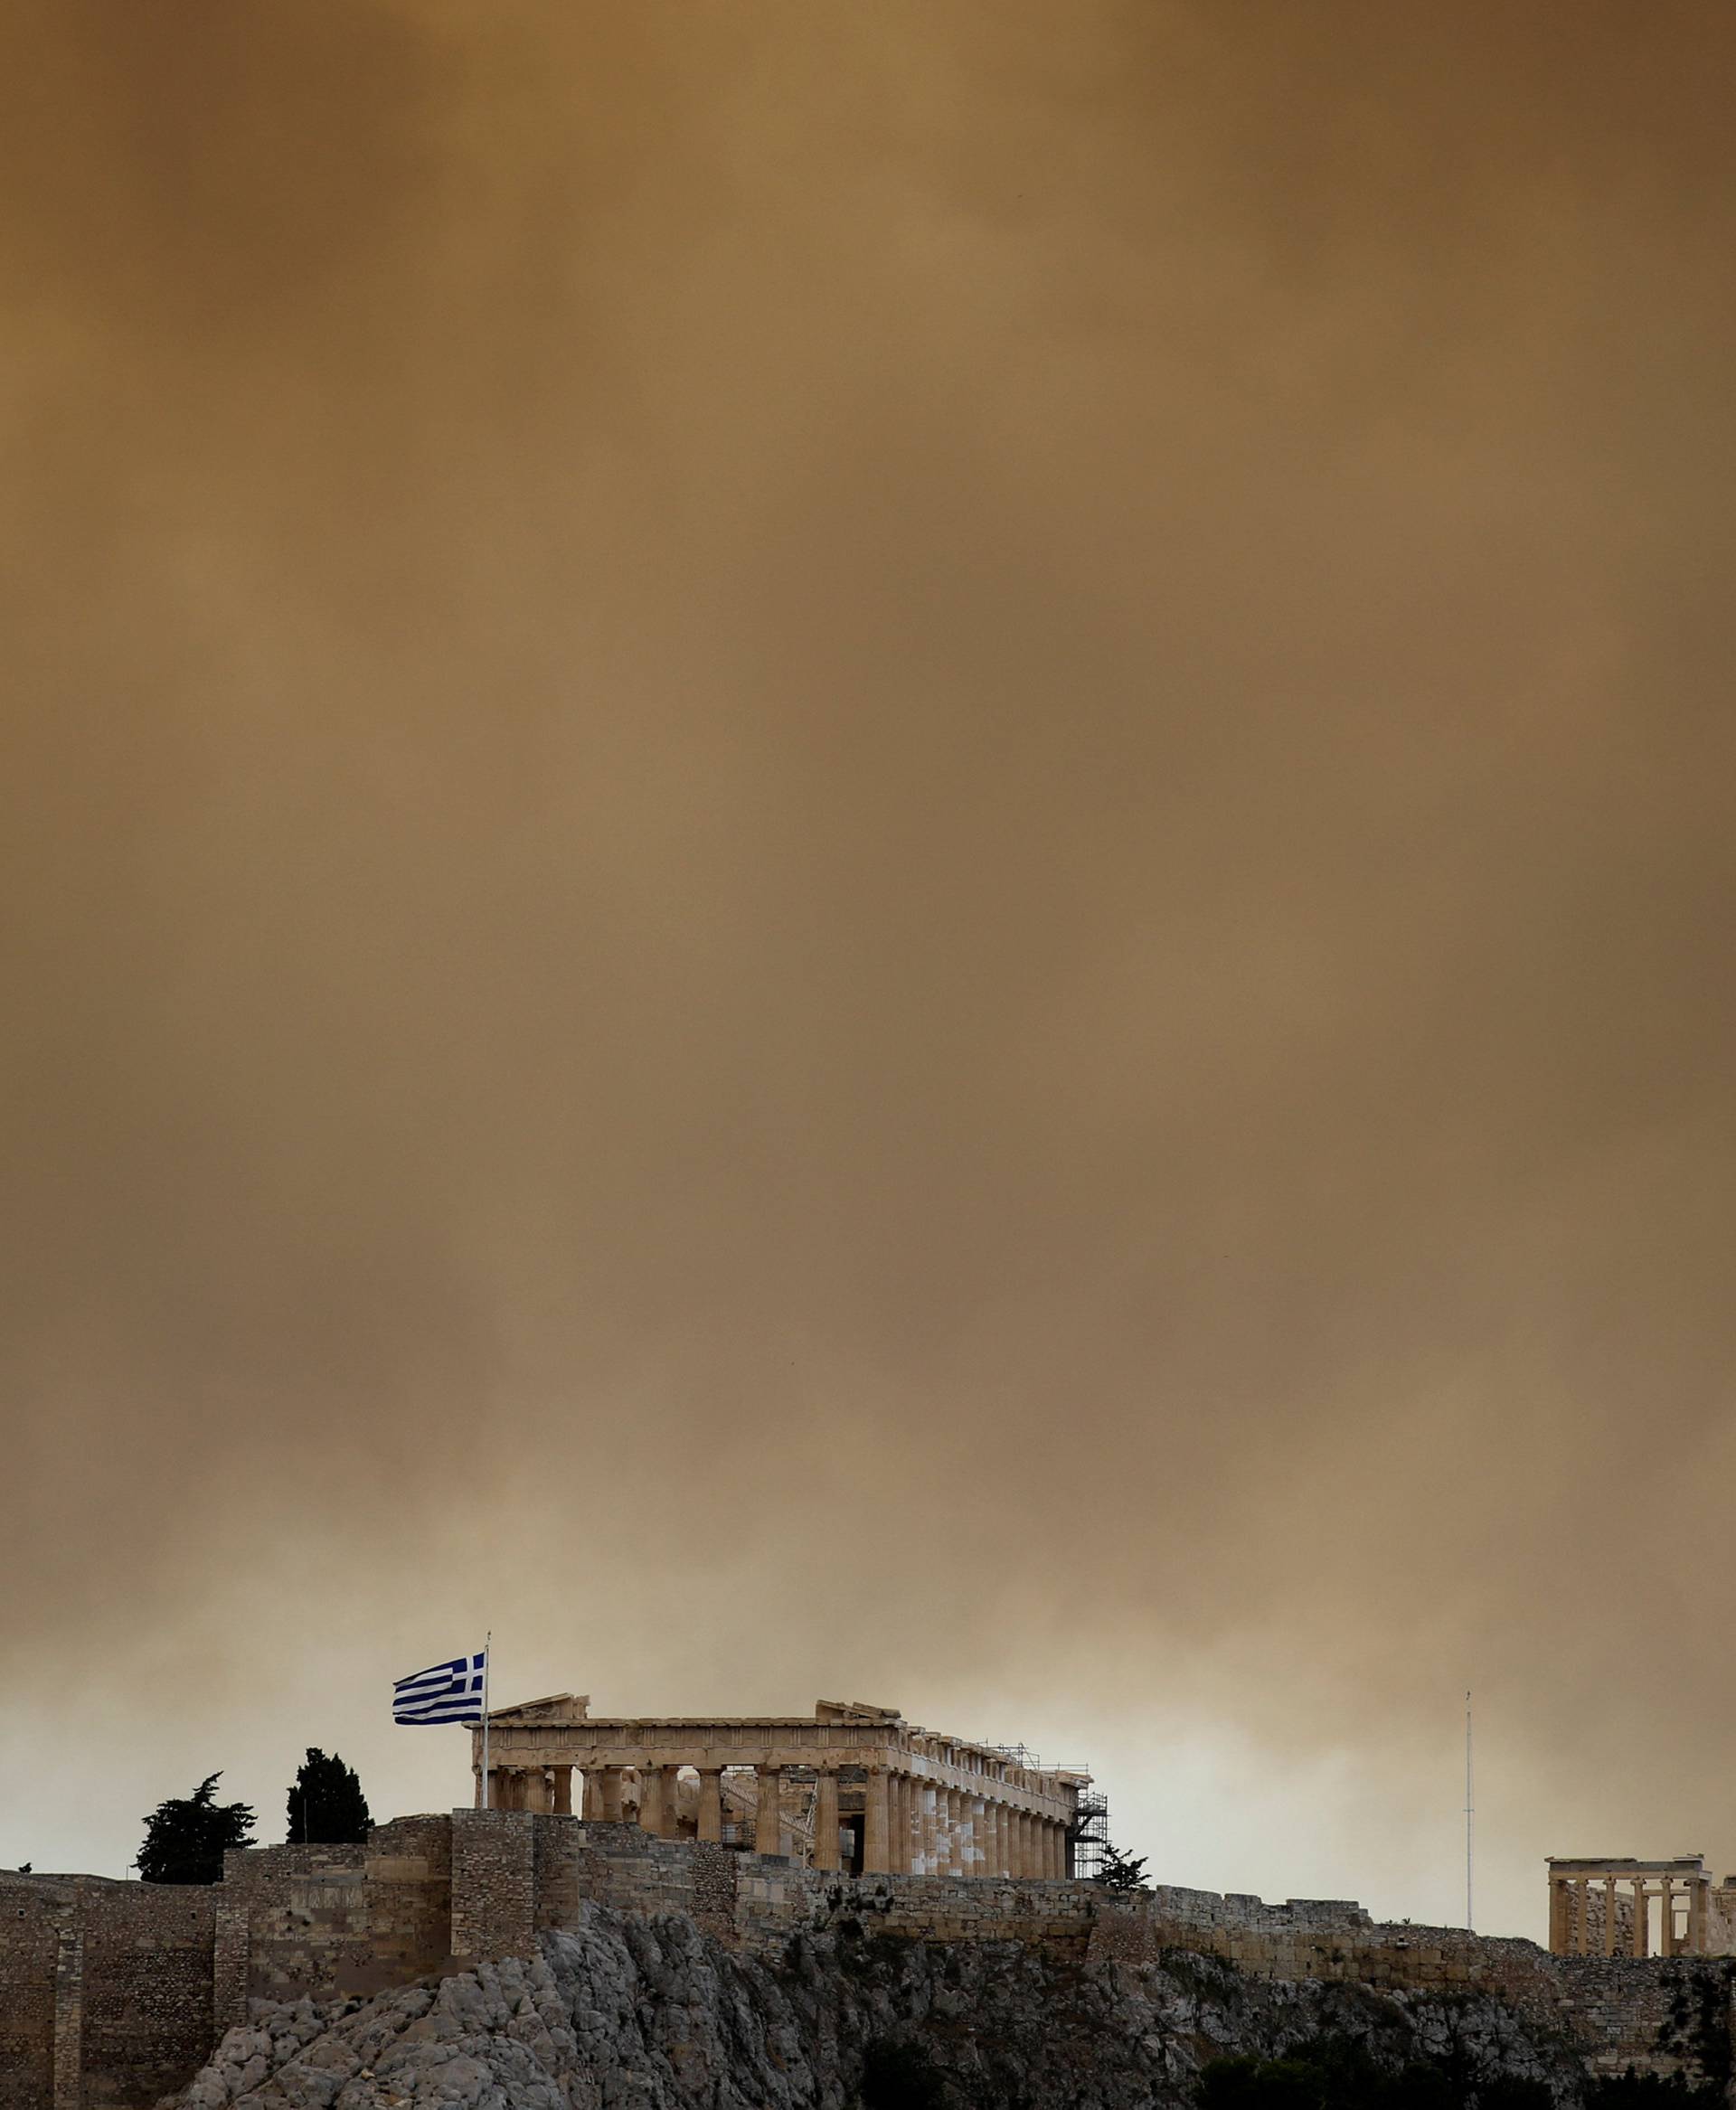 Smoke from a wildfire burning outside Athens is seen over the Parthenon temple atop the Acropolis hill in Athens